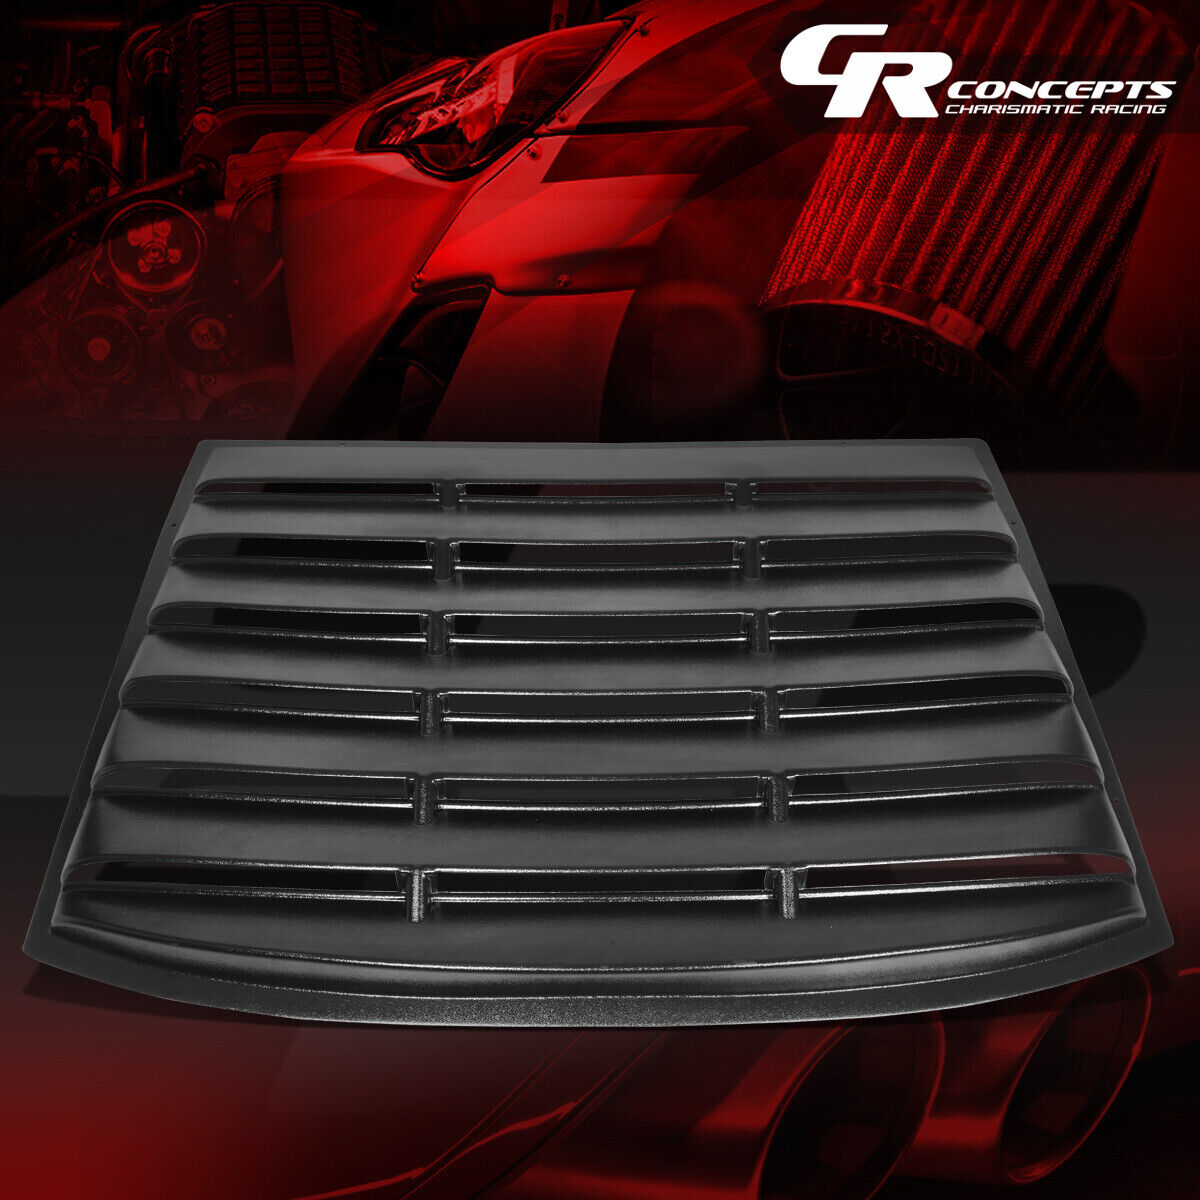 REAR WINDOW SUN SHADE LOUVERS STYLE SCOOP COVER GUARD FOR 06-10 DODGE CHARGER